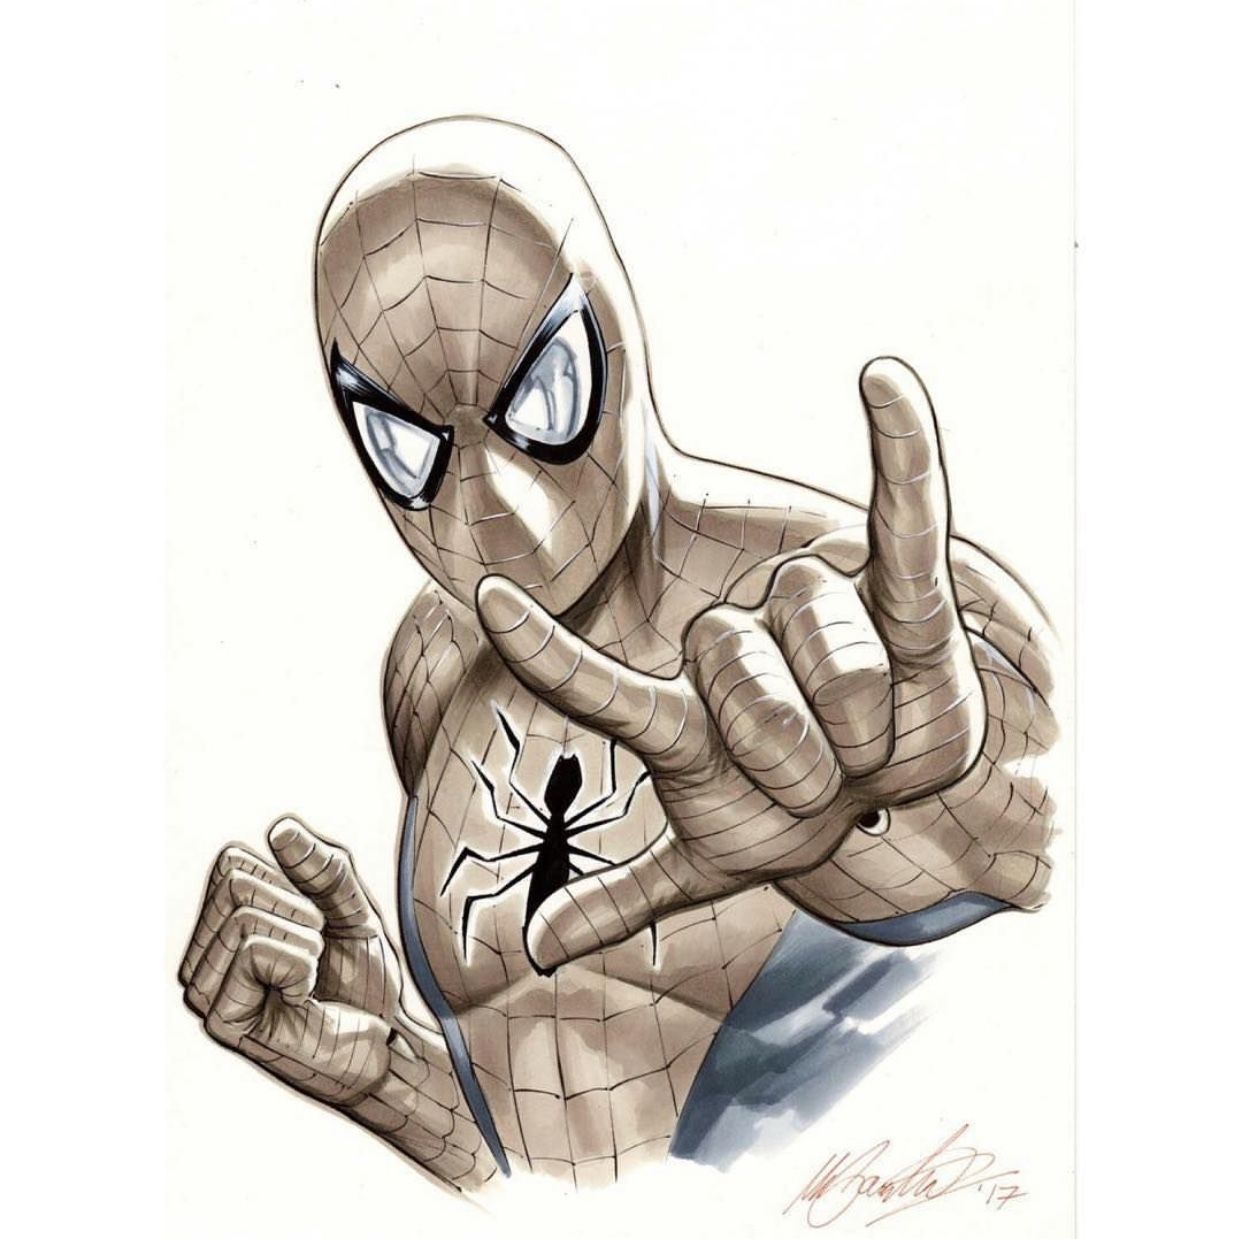 Drawings, Art, Spider Man, Black and White, and White image inspiration on  Designspiration